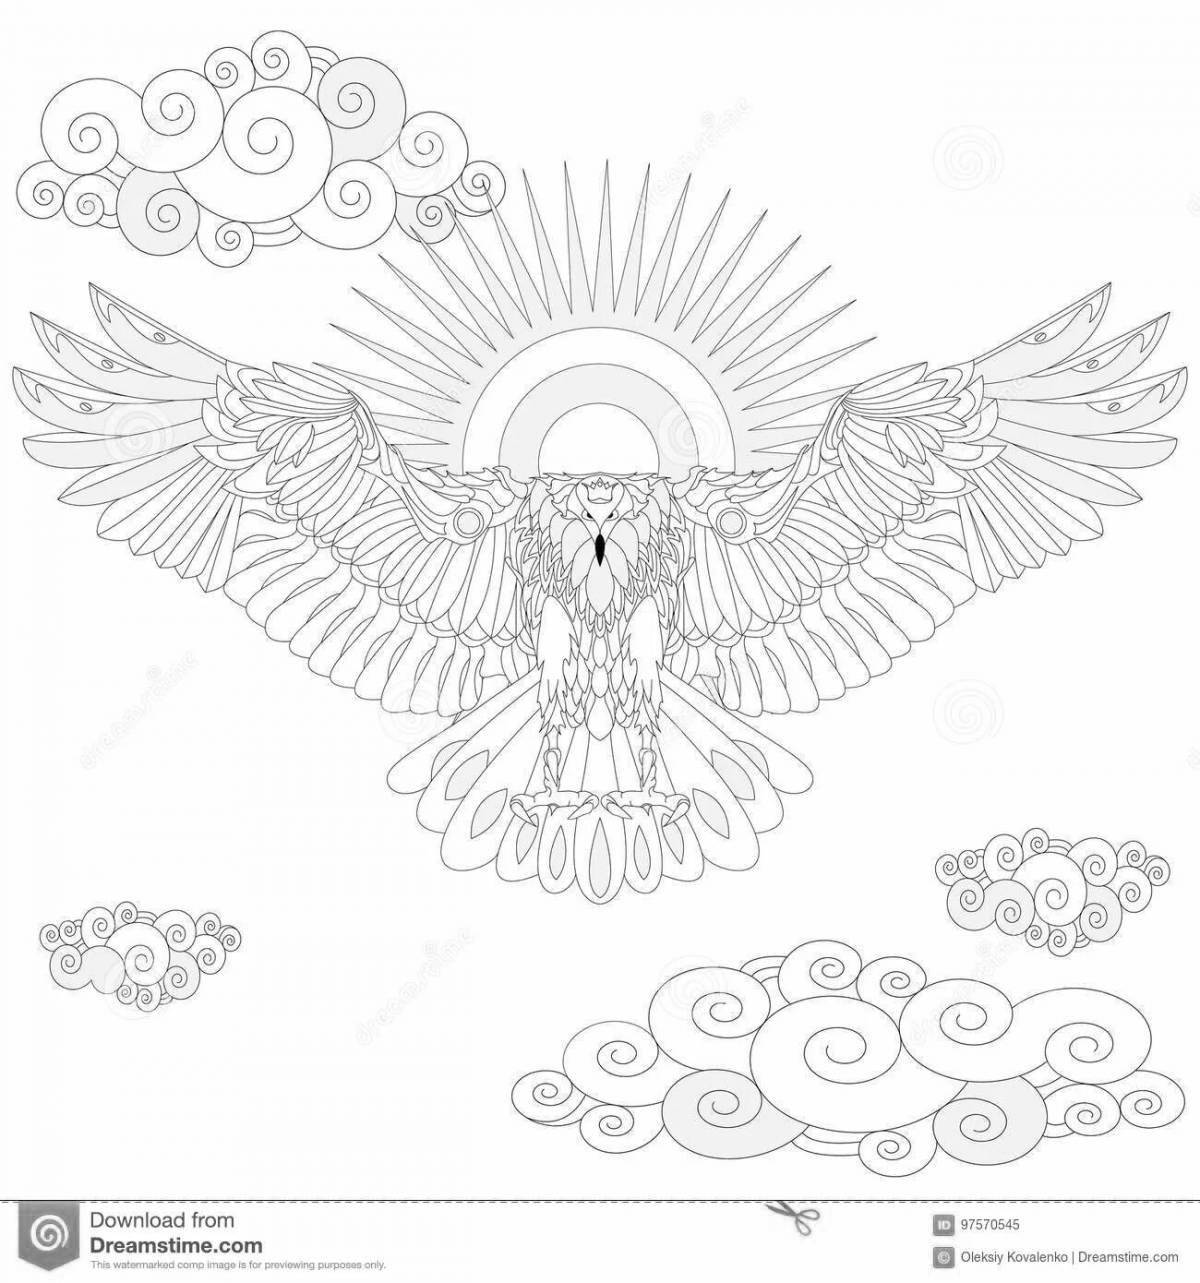 Coloring book exalted antistress eagle